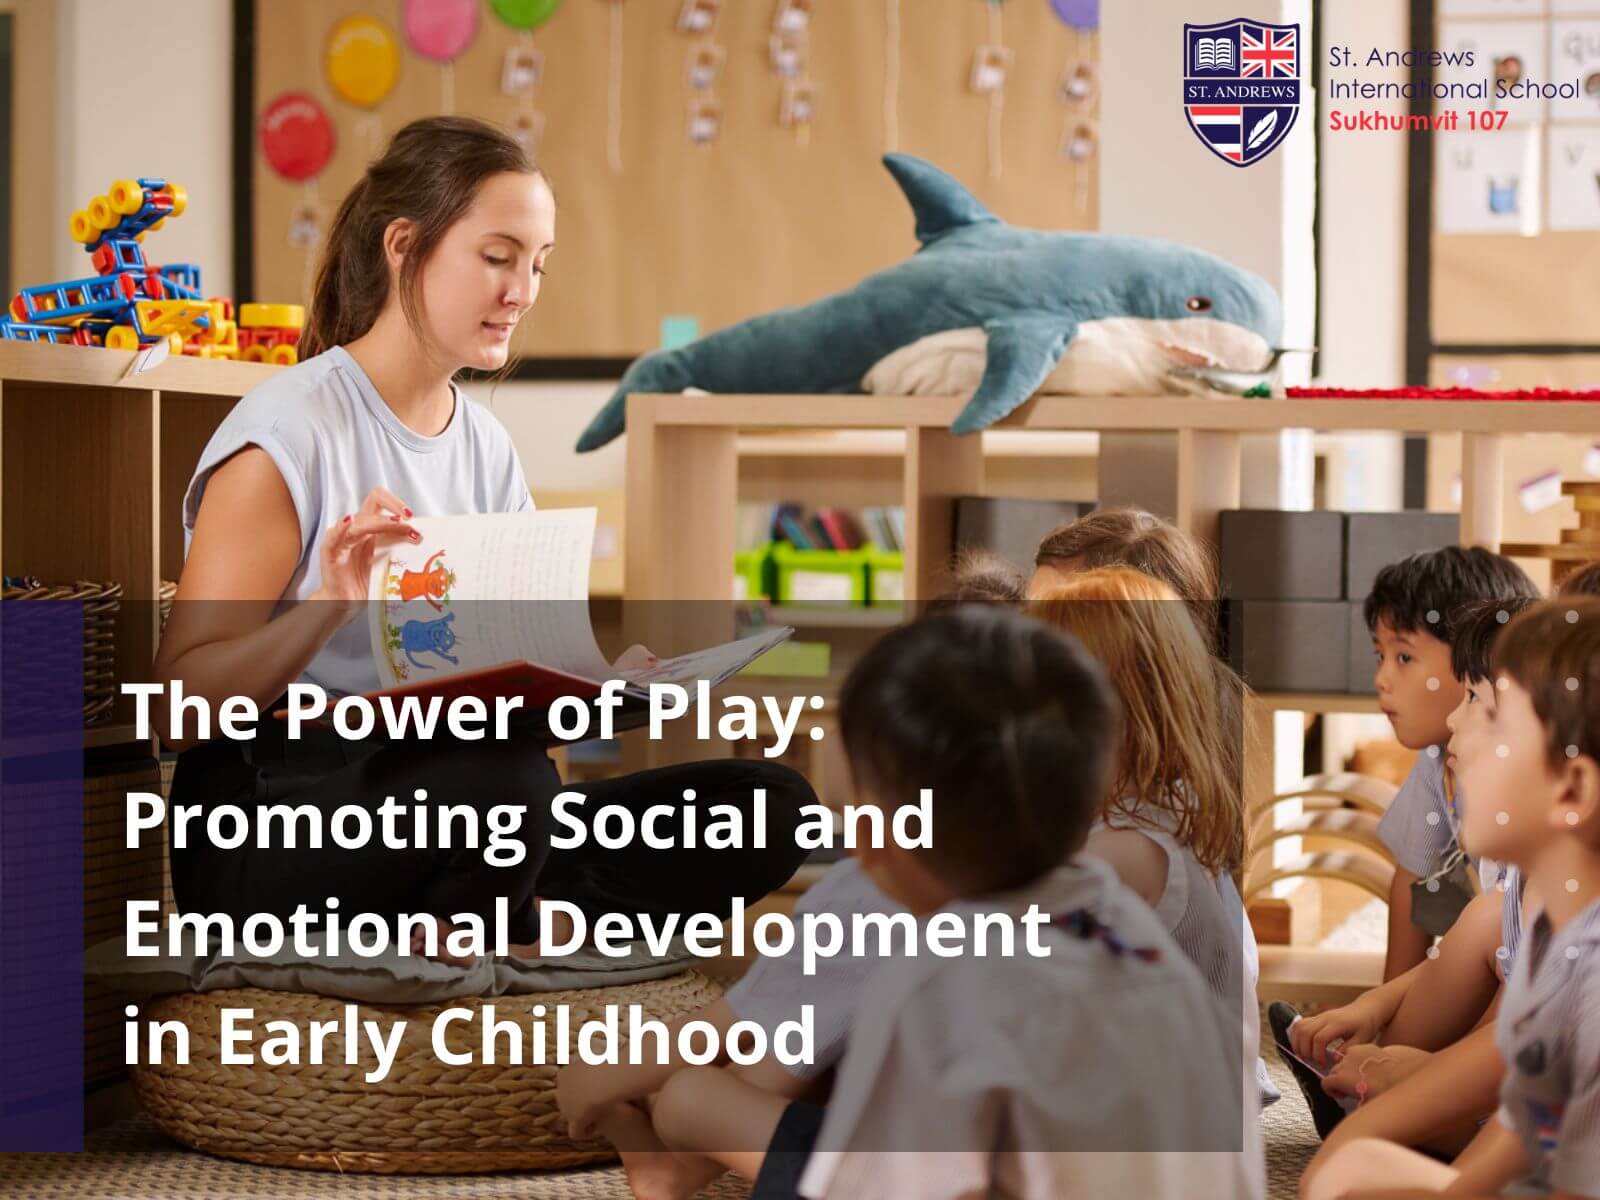 The Power of Play Promoting Social and Emotional Development in Early Childhood